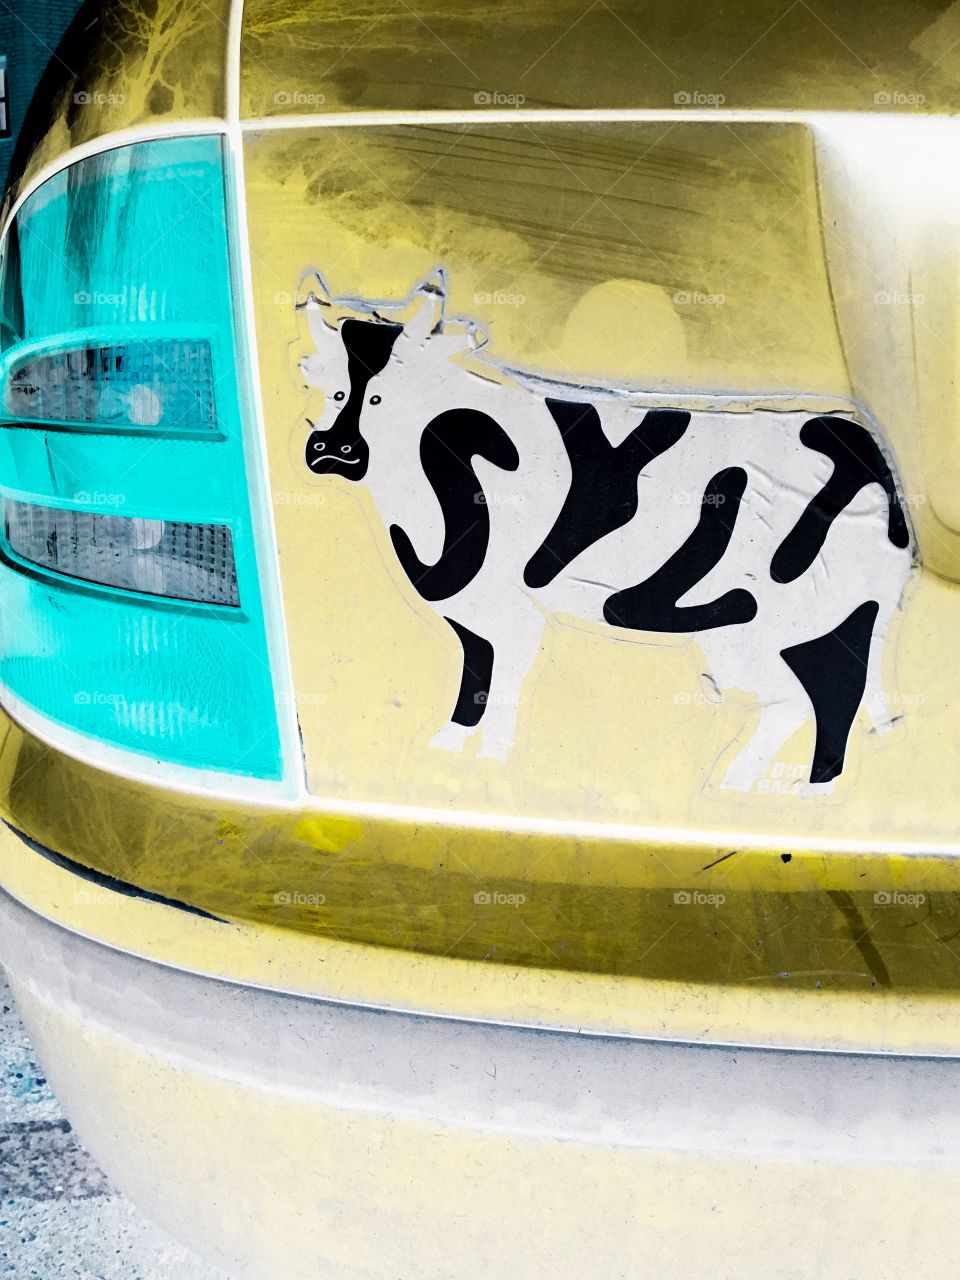 Cow sticker seen on trunk of car